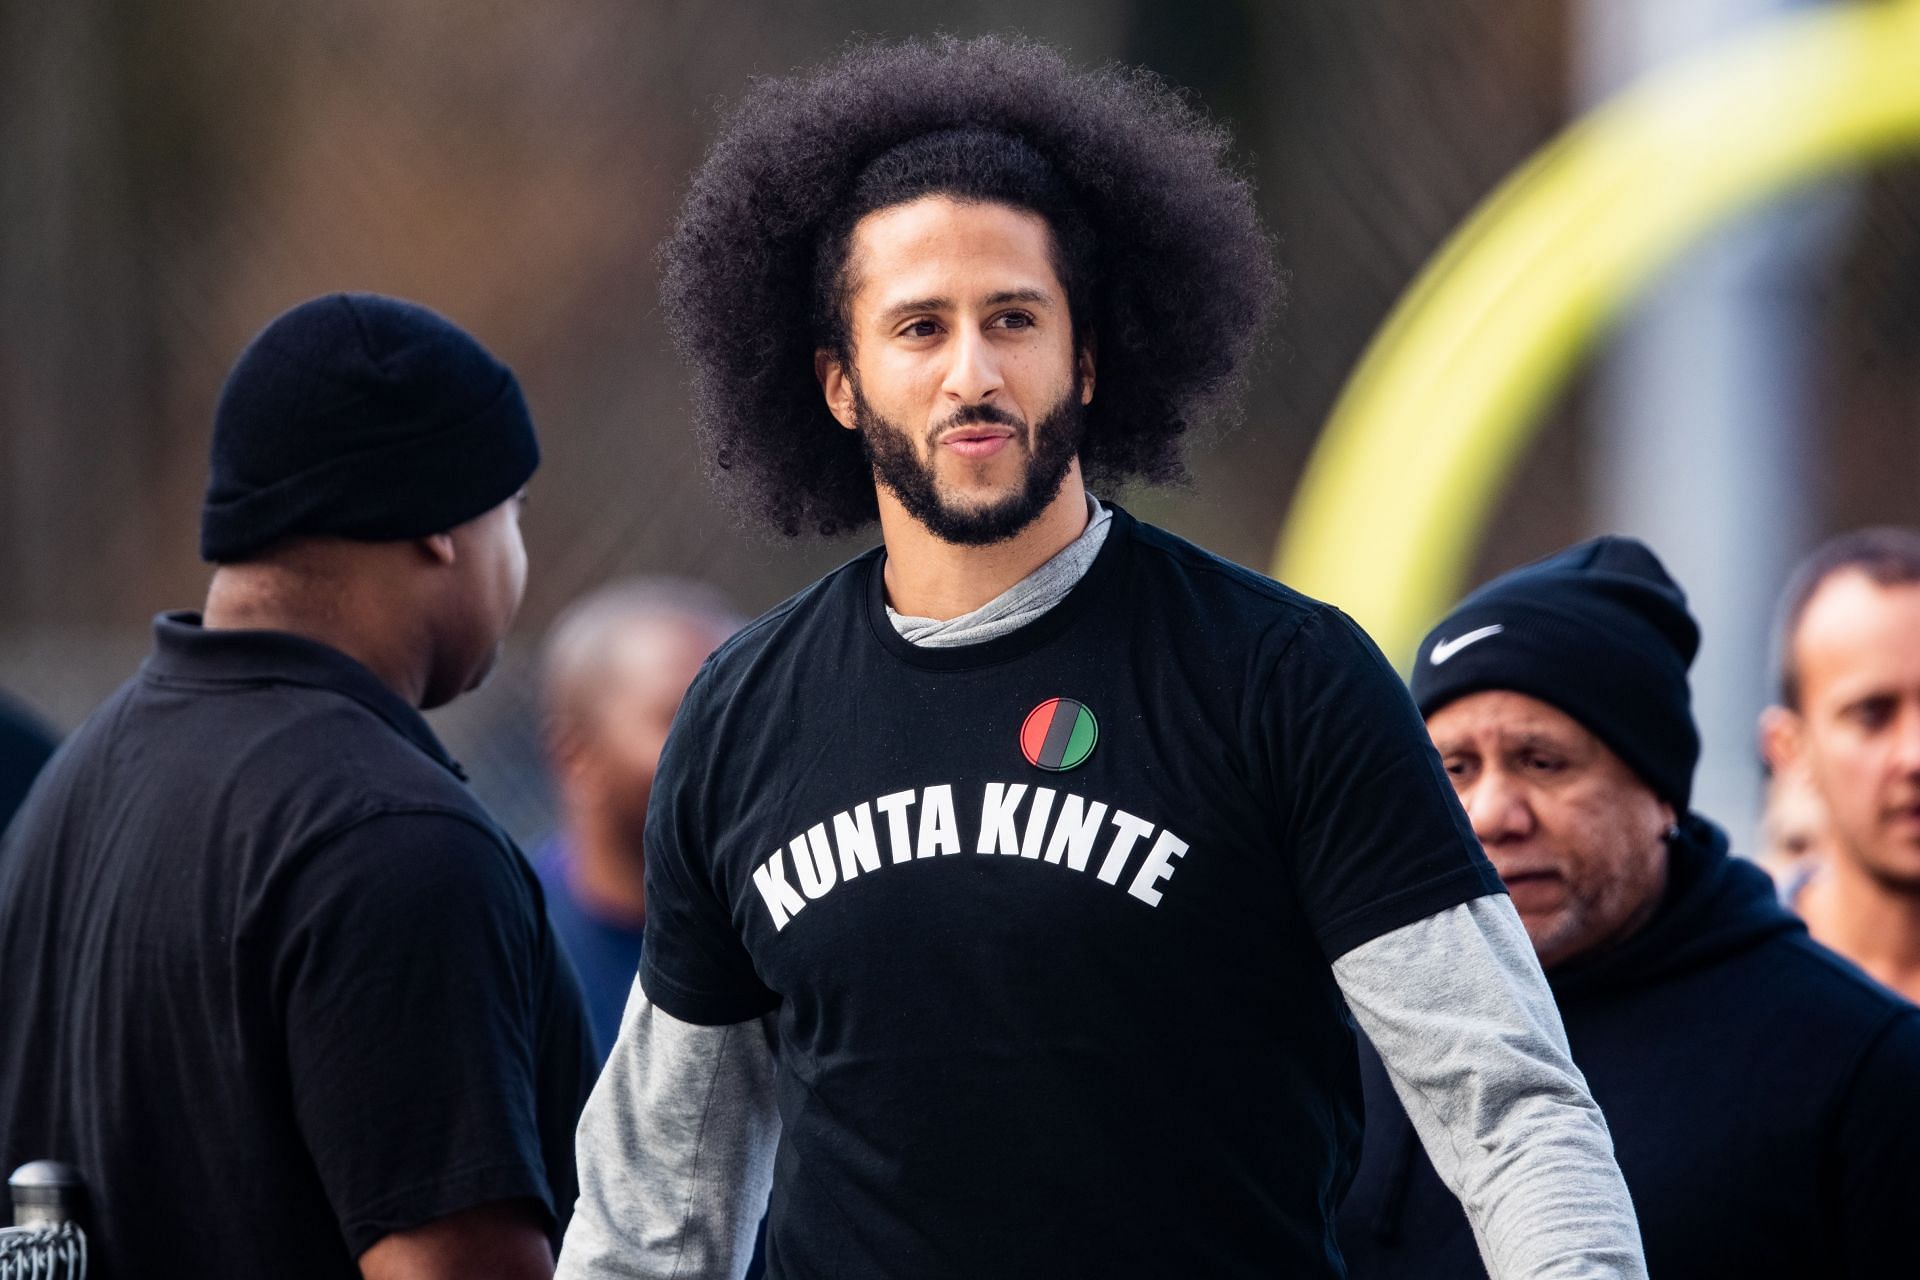 Where does Colin Kaepernick fit in best?